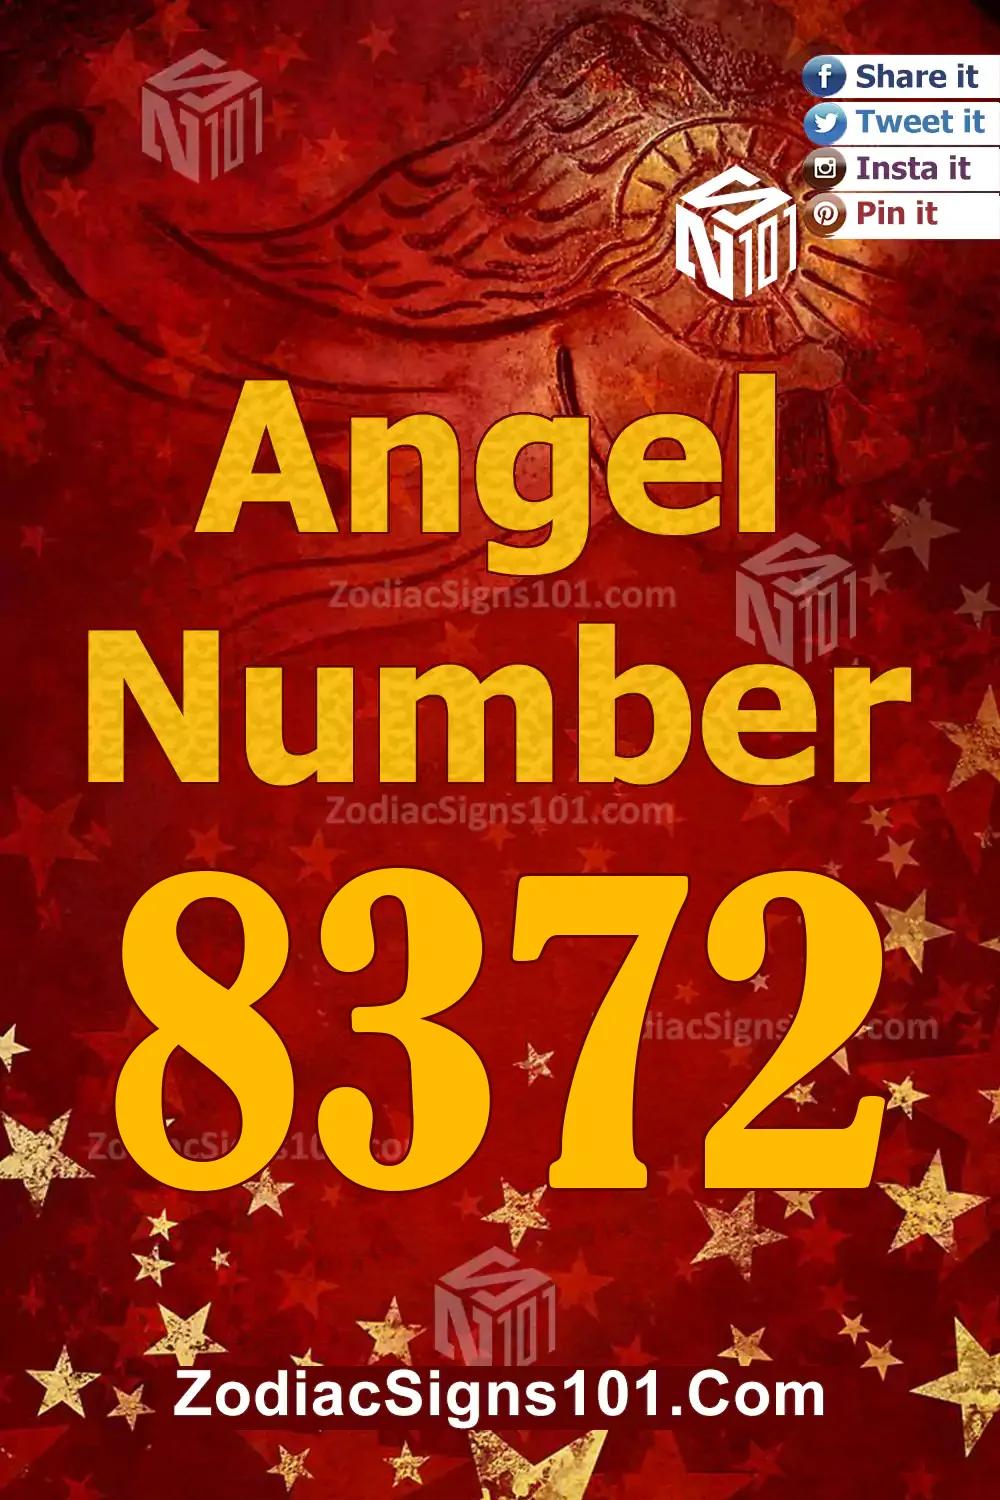 8372 Angel Number Spiritual Meaning And Significance - ZodiacSigns101